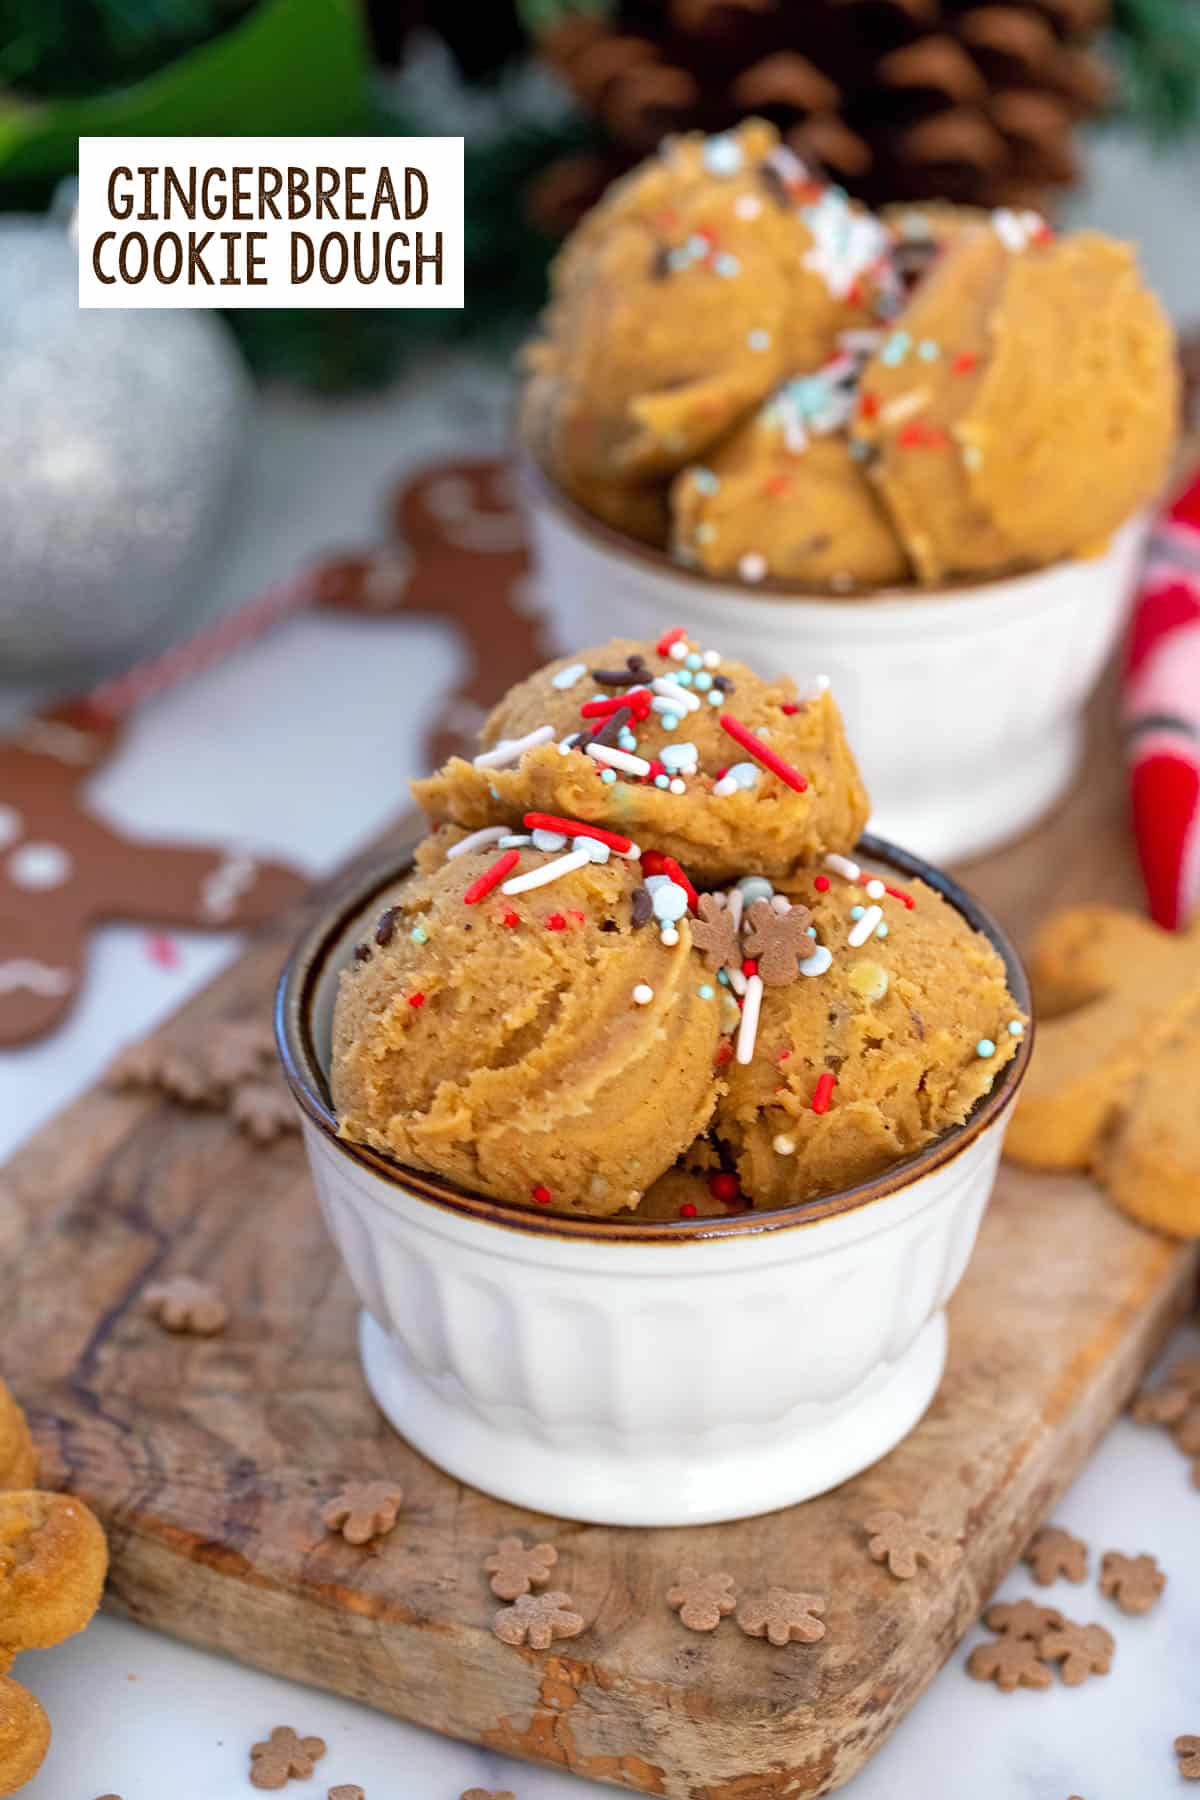 Small bowls filled with gingerbread cookie dough with sprinkles with recipe title at top.